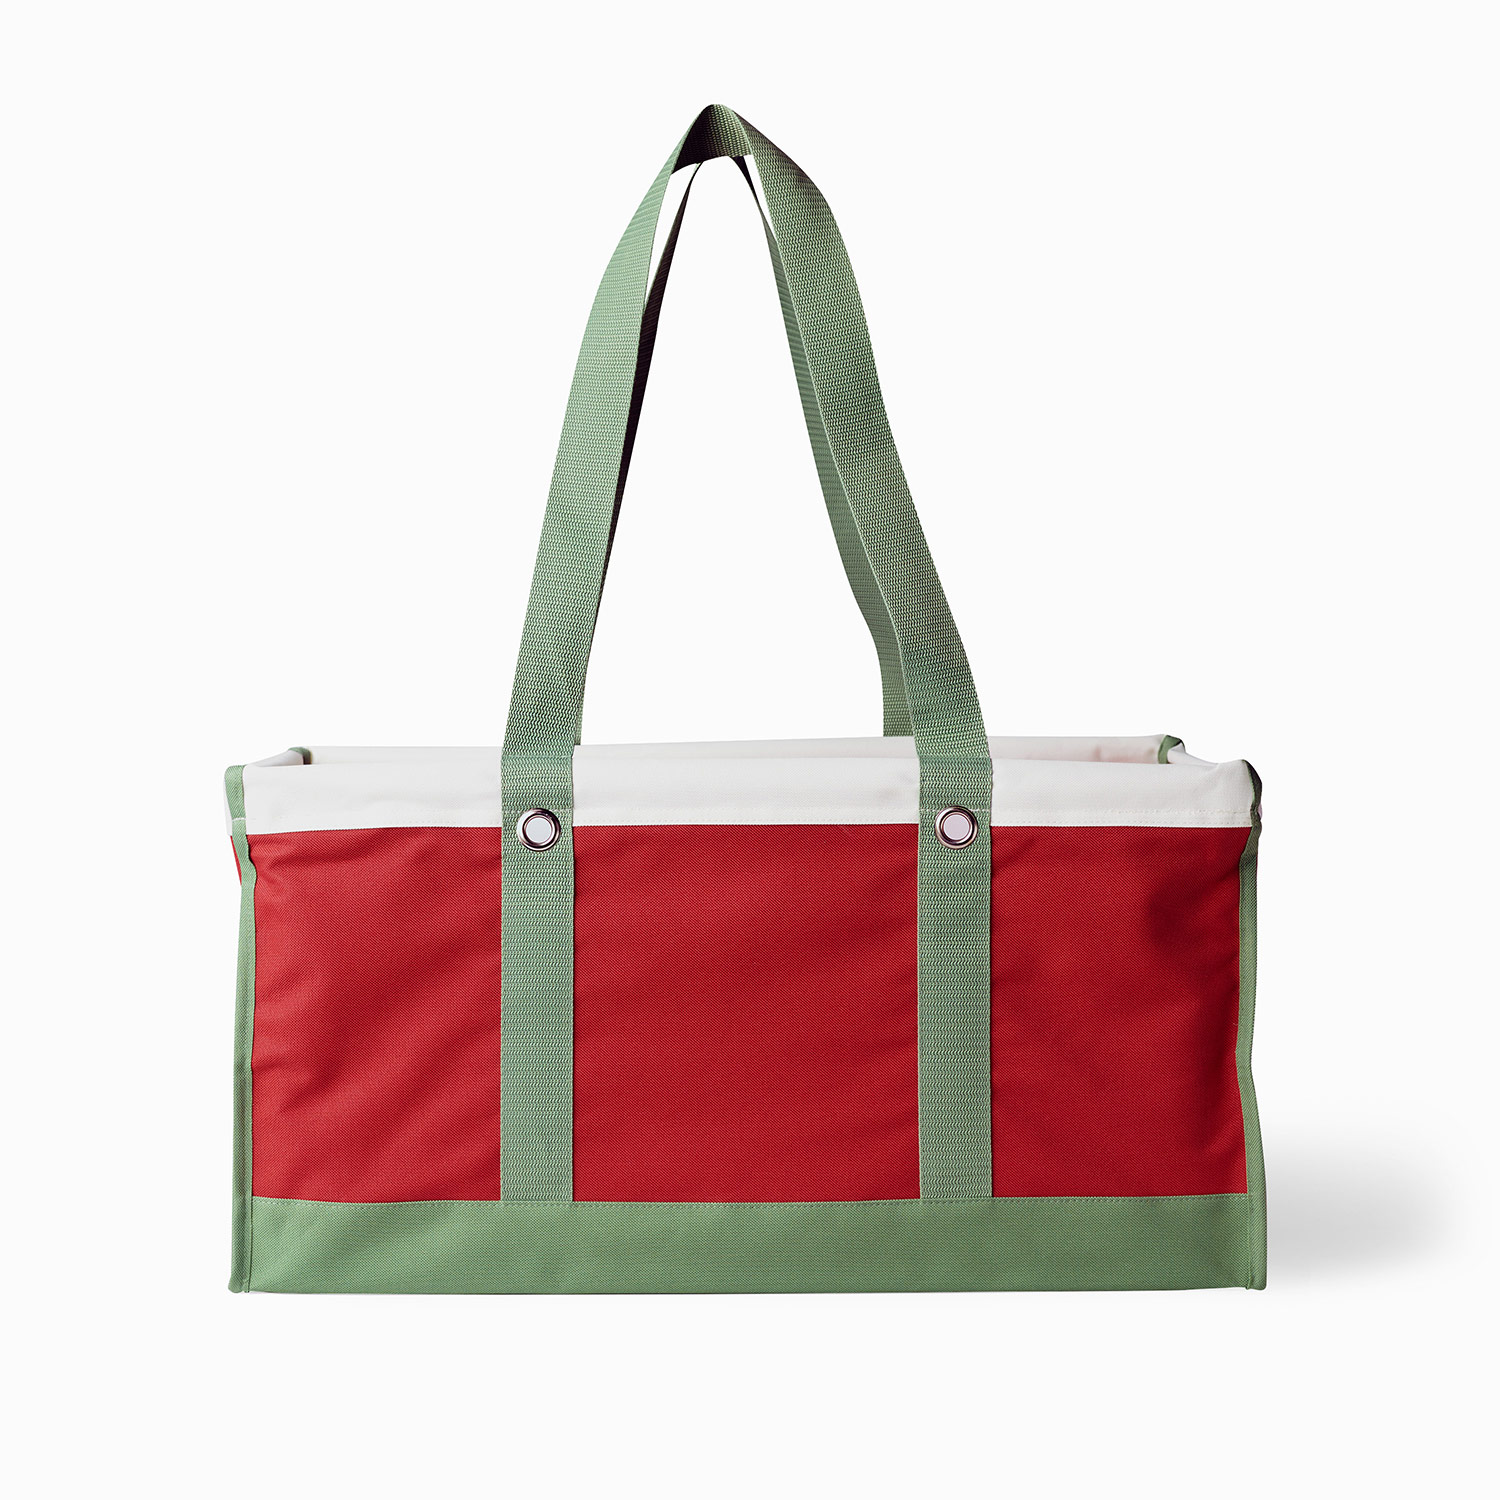 The Colorblock Large Tote Bag